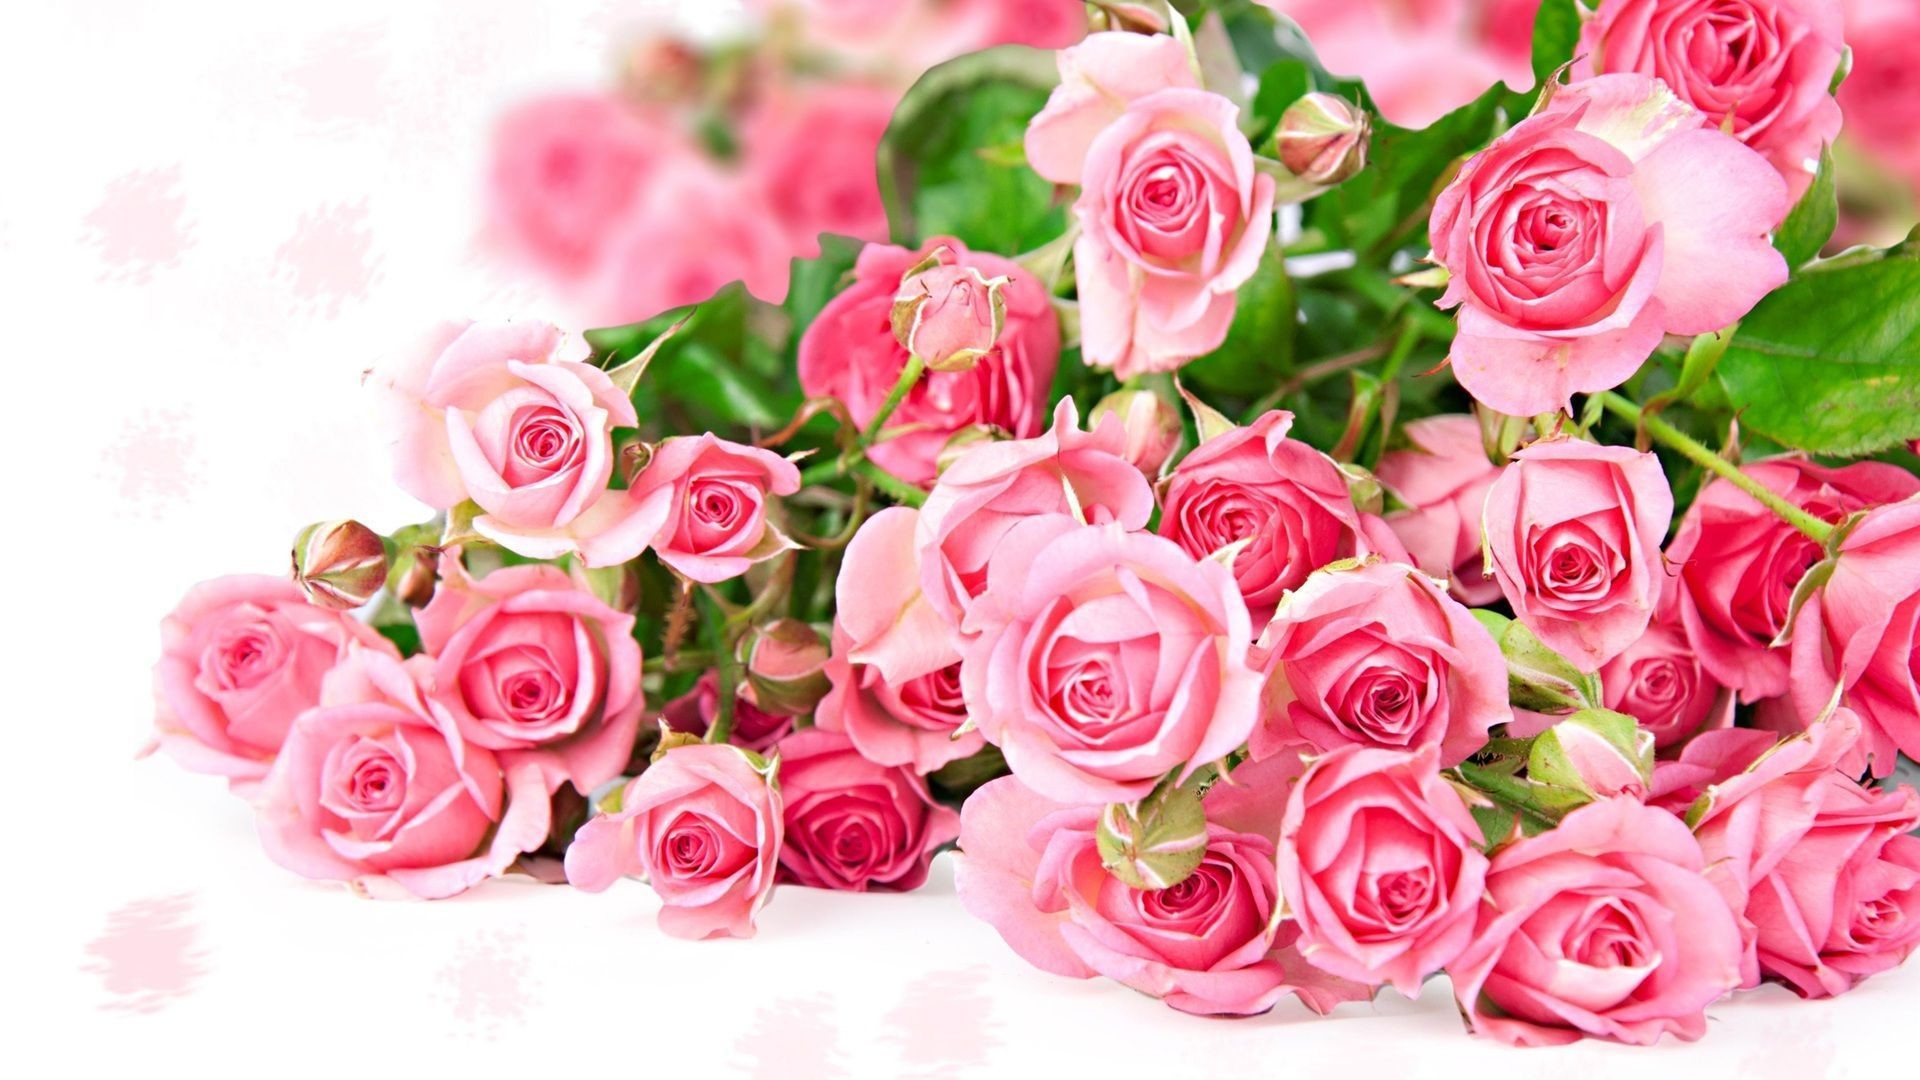 rose wallpapers for wndows8  Beautiful flowers images Rose flower  wallpaper Flower images free